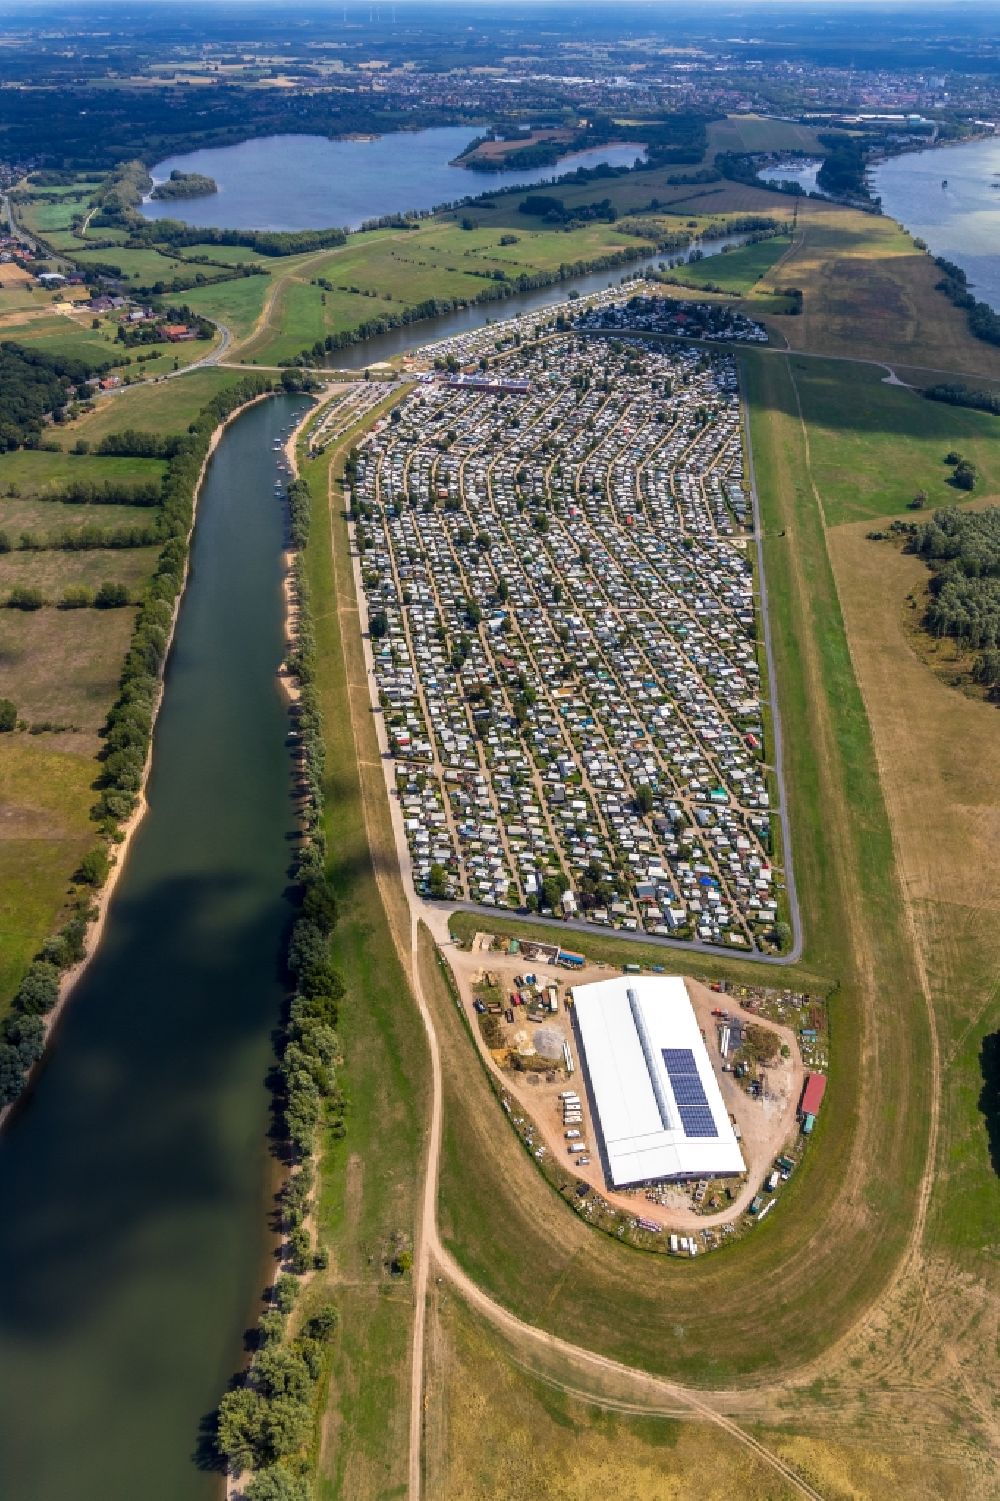 Aerial image Wesel - Camping with caravans and tents on Rhone river in Wesel in the state North Rhine-Westphalia, Germany